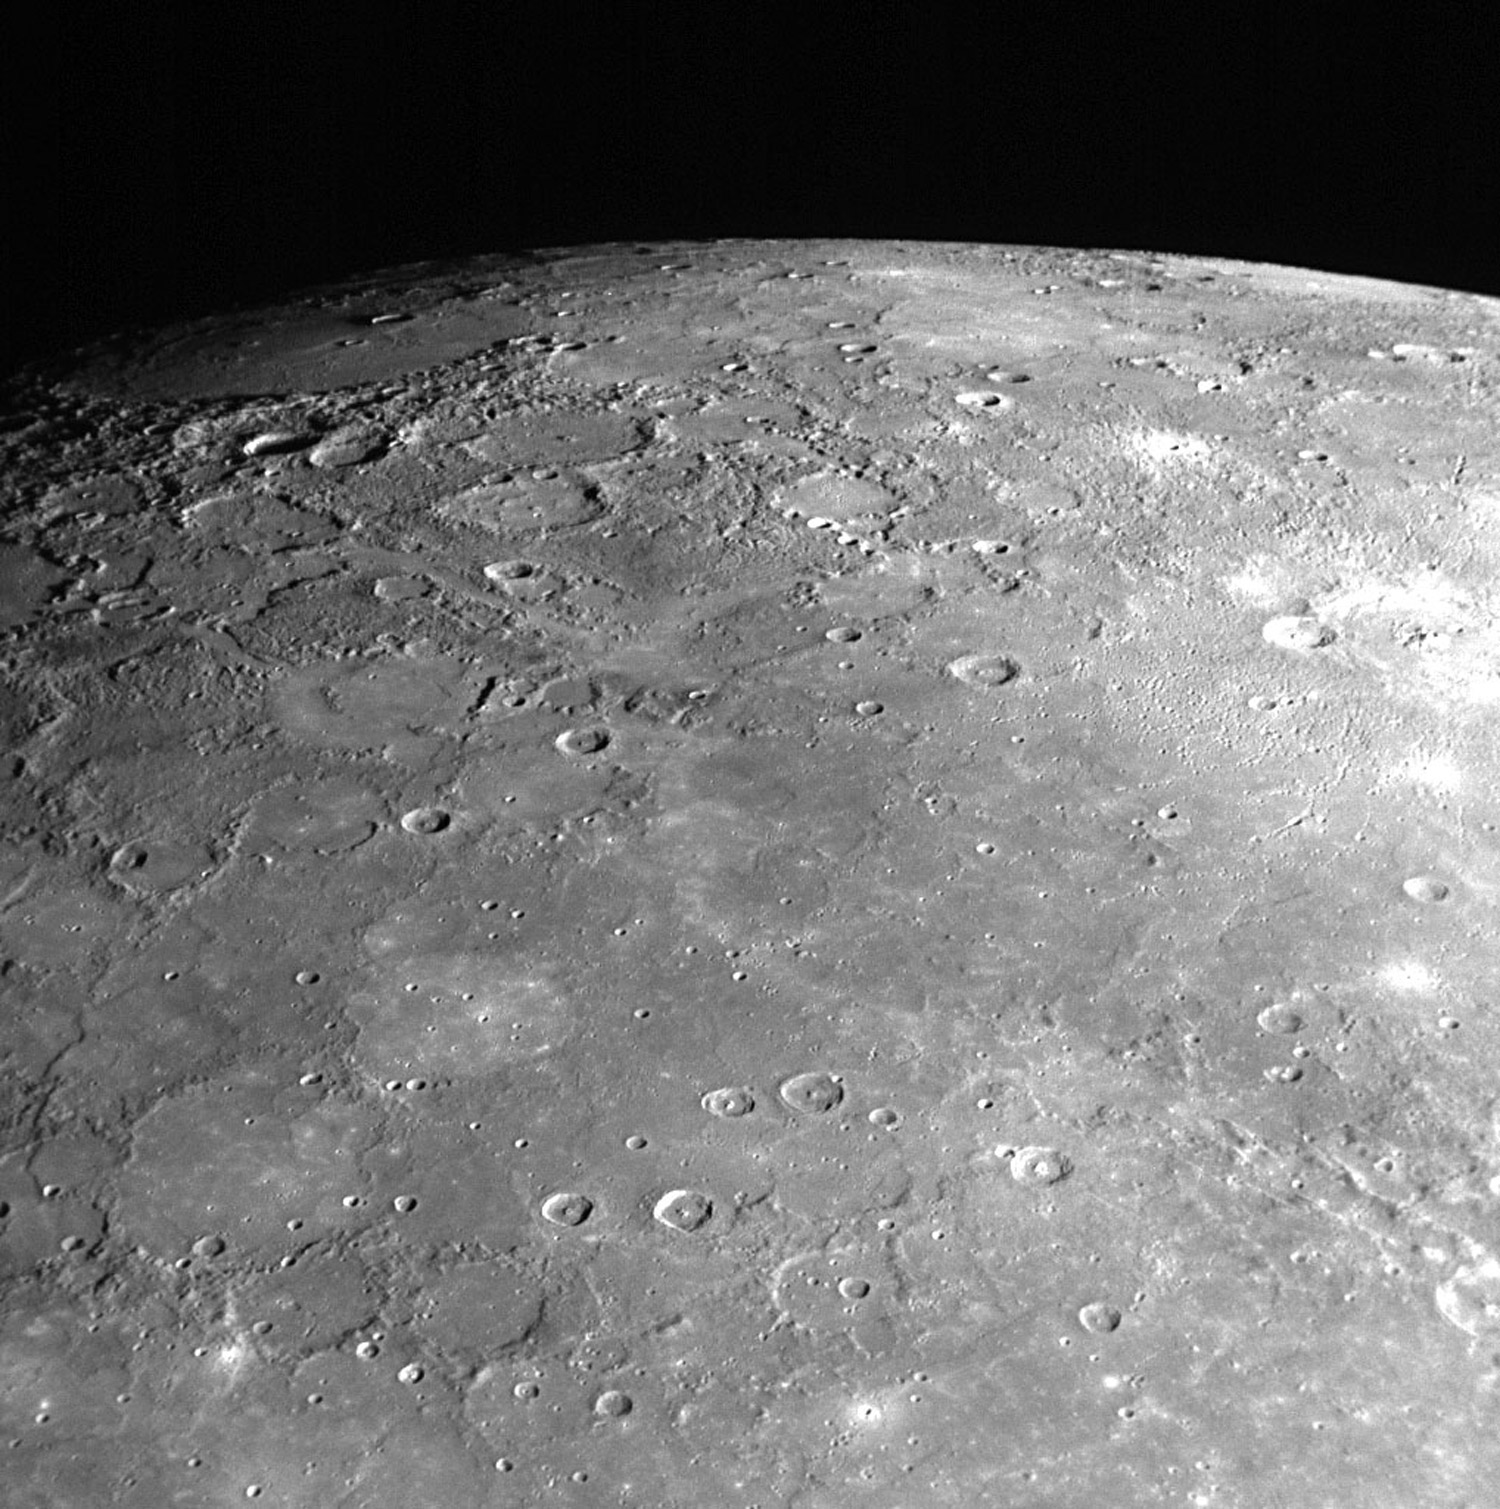 No Santa Here: During a 2008 flyby, Messenger’s narrow angle camera captured this image of Mercury's north pole. Until that moment, this region been terra incognita, never before seen by spacecraft. The low angle of the sun throws surface features into sharp relief, making it easier to understand the local topography. For reasons not yet understood, the north pole of the planet is more heavily cratered than the south.